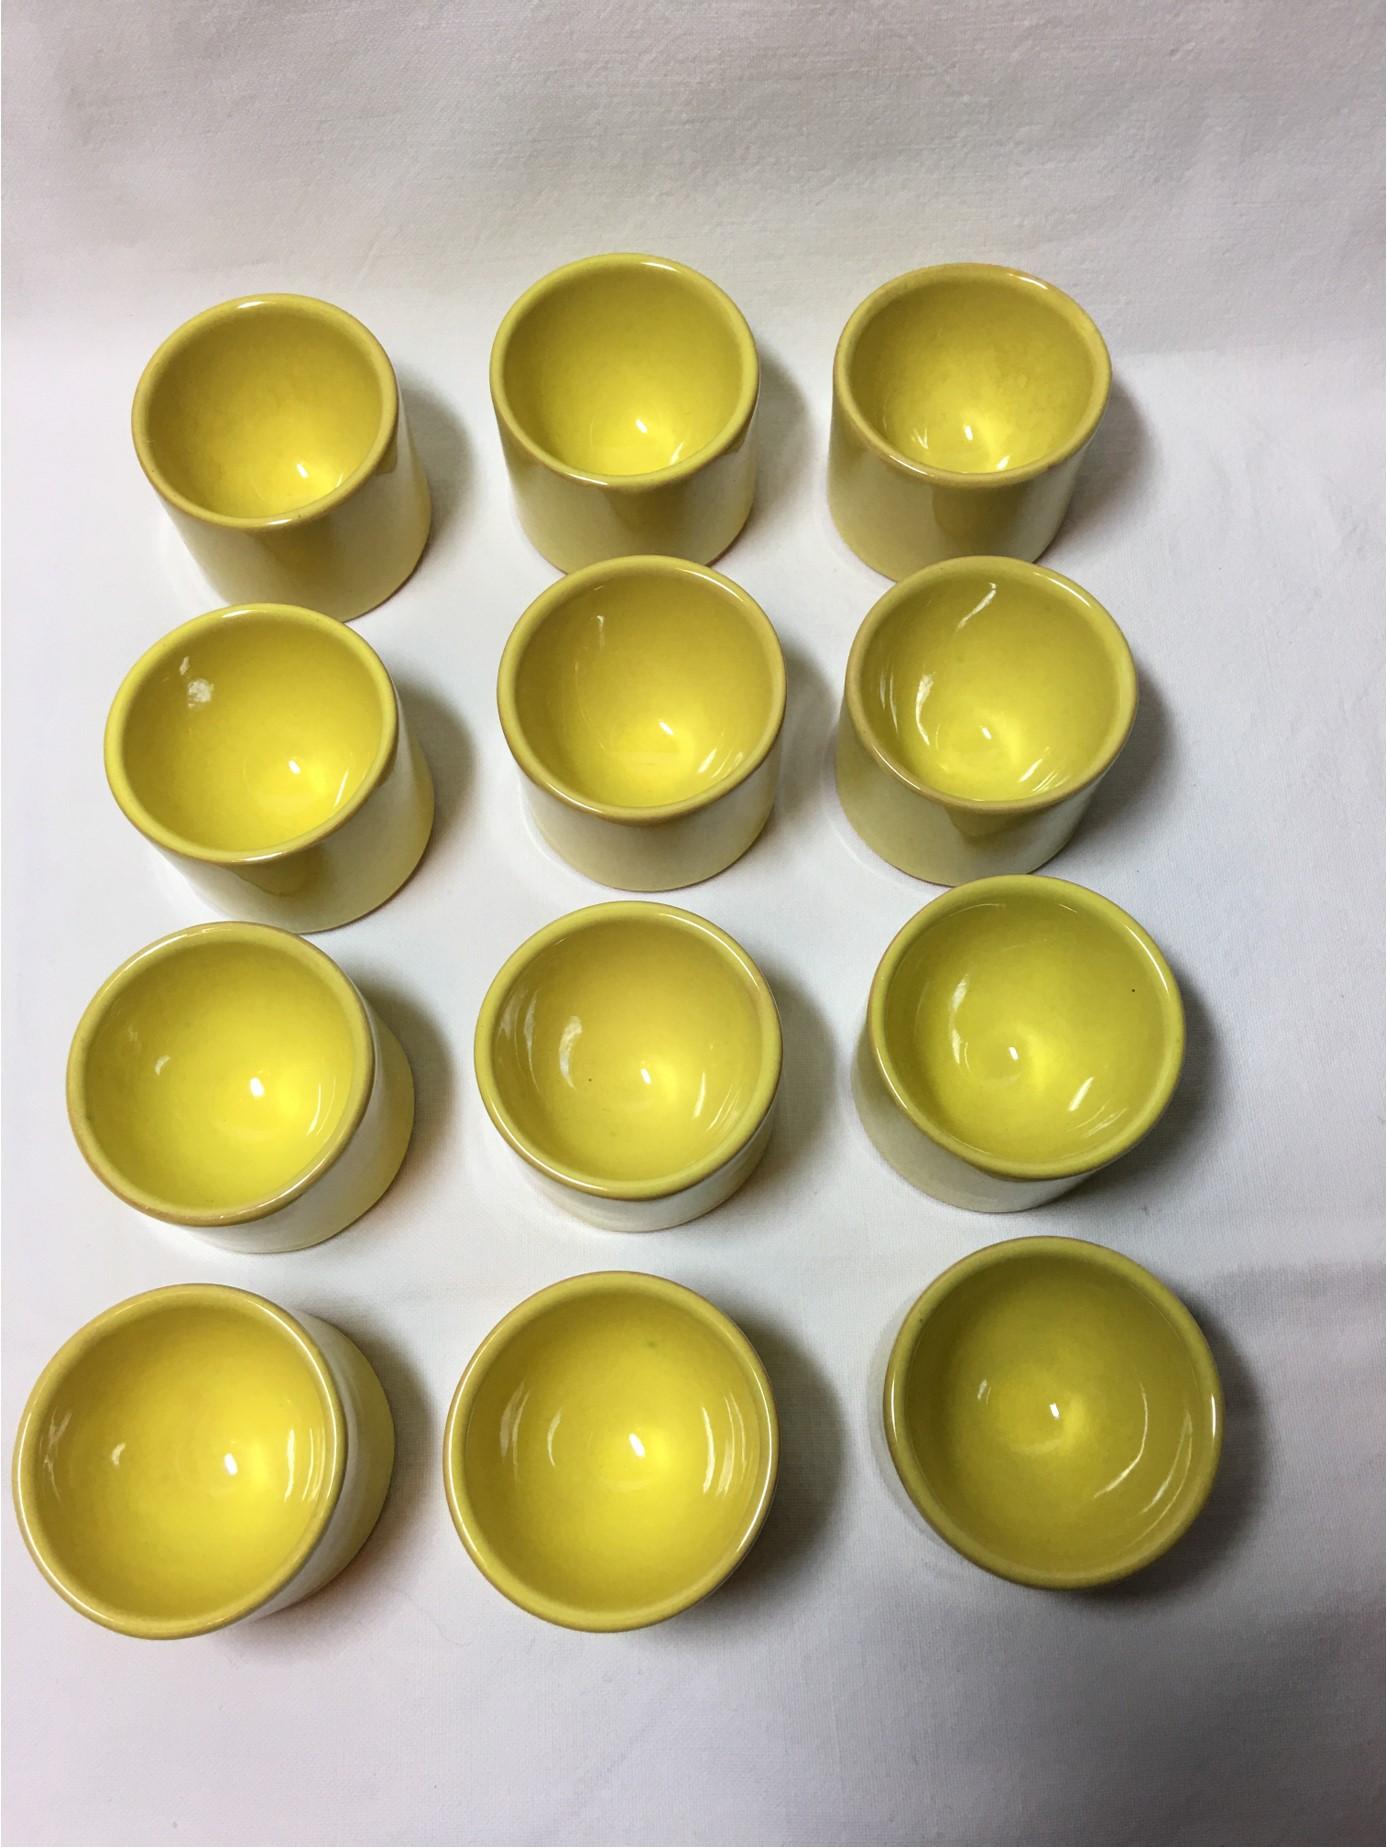 A dozen wonderful yellow Bijorn Winblad Rosenthal egg cups discovered recently in an attic. Never used and in excellent condition. These 1960s era egg cups are a set of two dozen that were found Yellow and Red. We can mix the color or ship solid